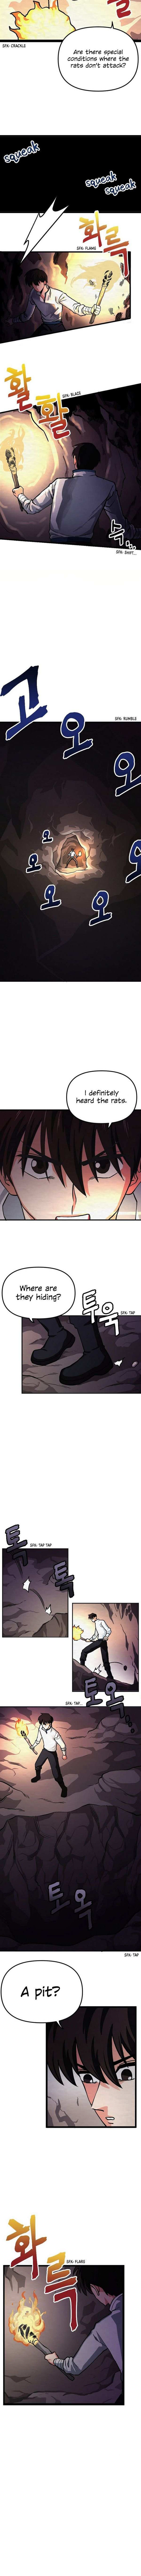 ARK (Taeha) Chapter 7 - page 8